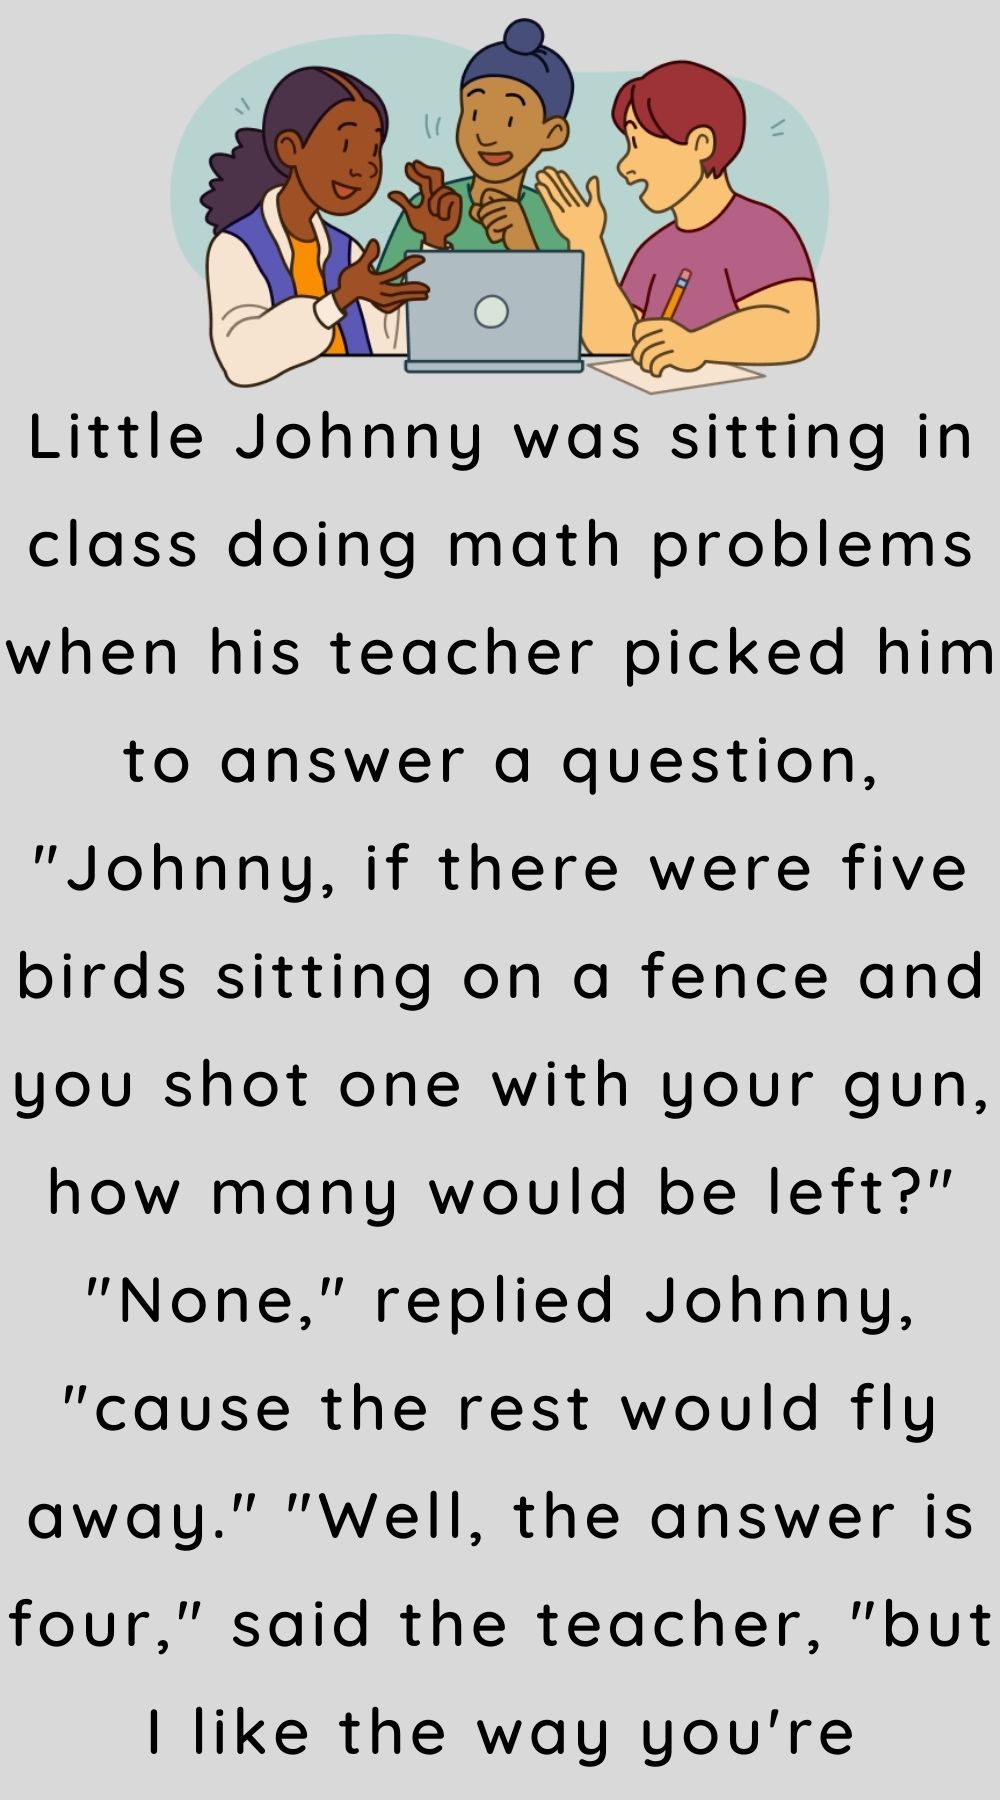 Little Johnny was sitting in class doing math problems